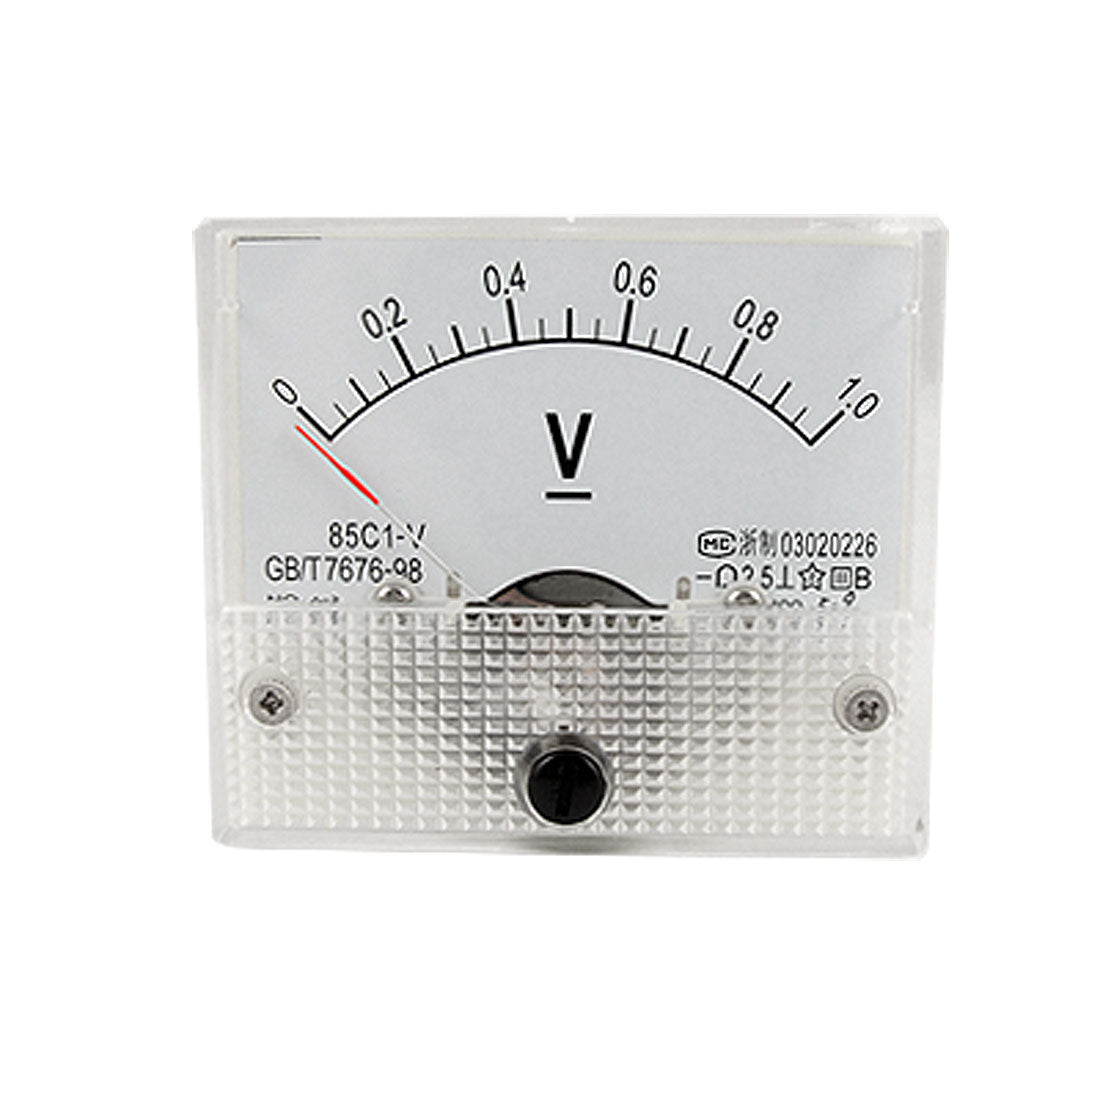 uxcell Uxcell 85C1 Fine Tuning Dial Analog Voltage Panel Meter Voltmeter DC 0-1V 0.05V Scale